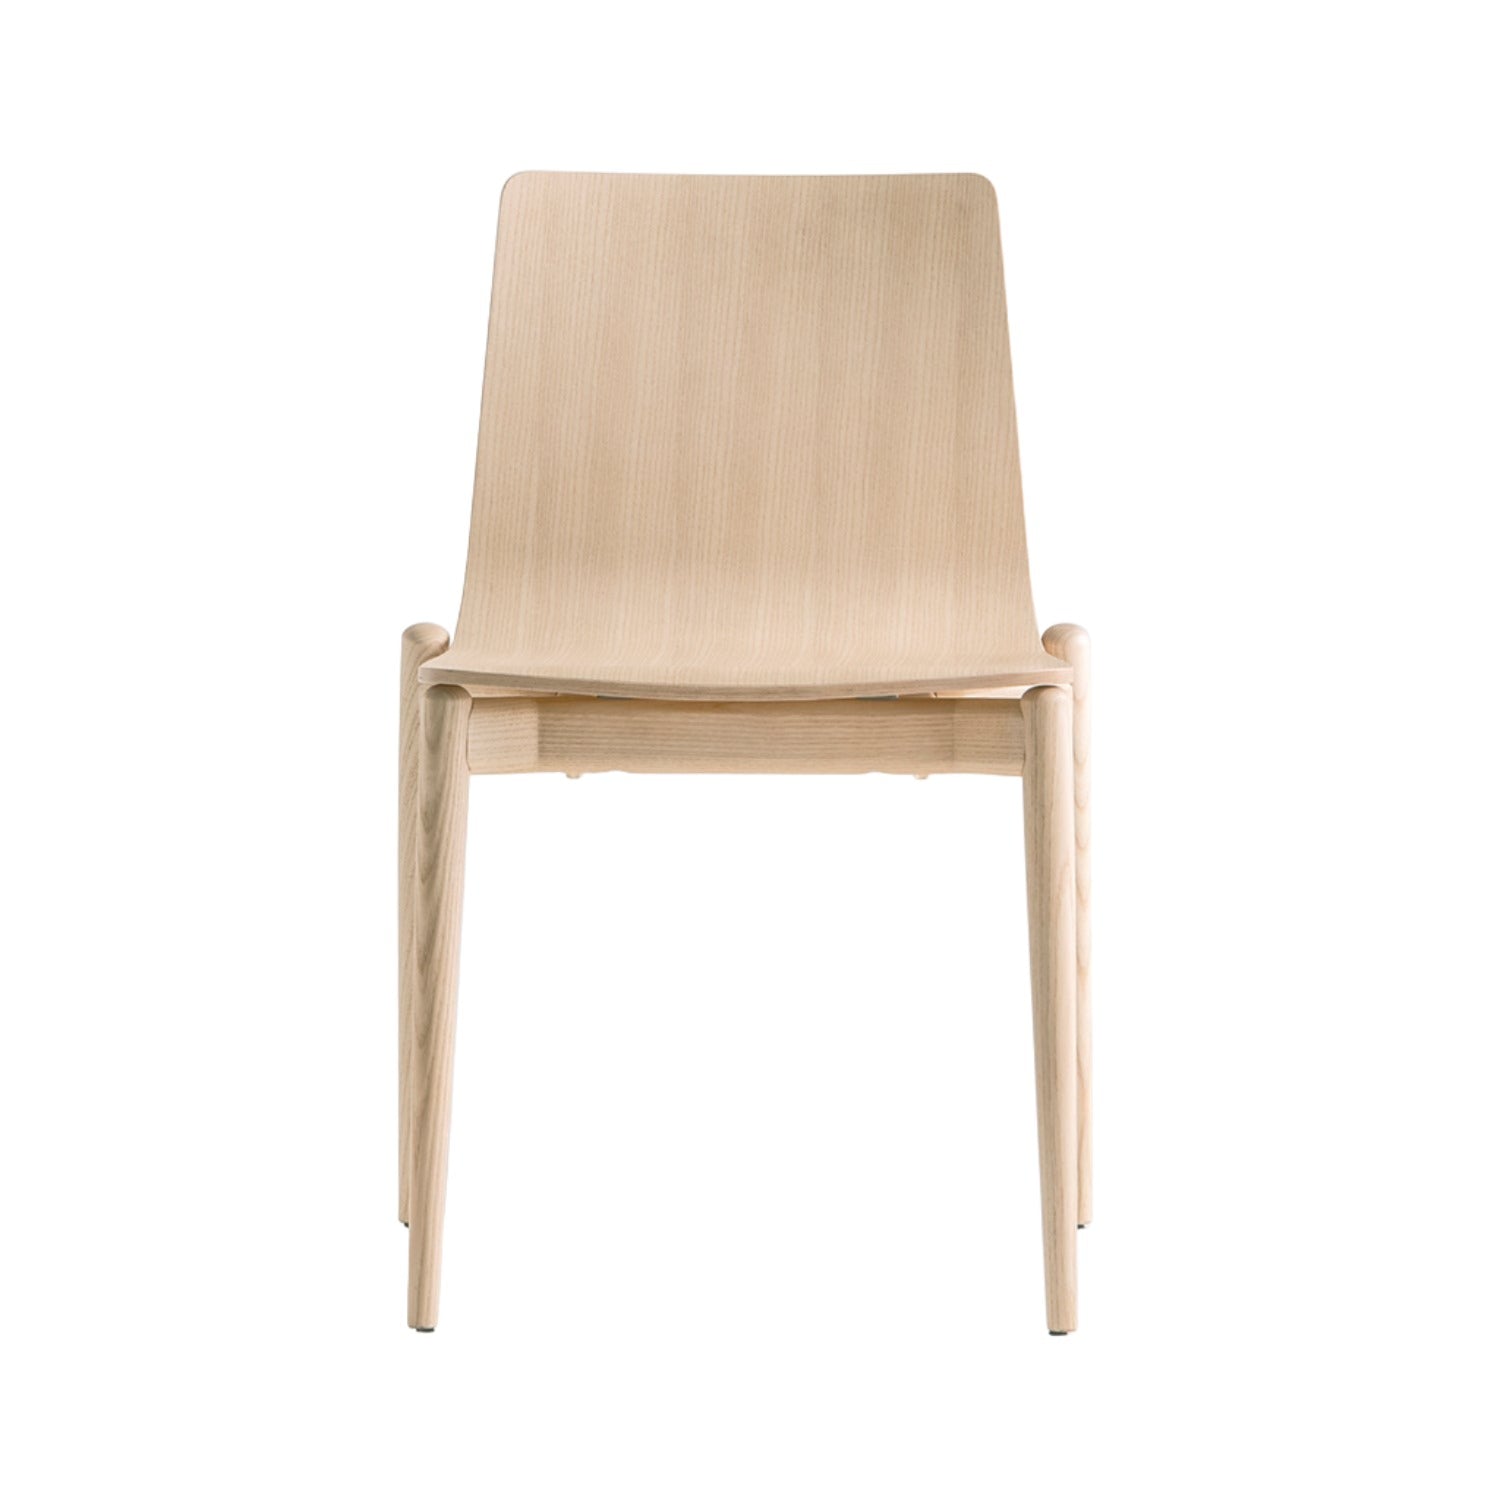 Pedrali Malmo 390 Dining Chair in ash